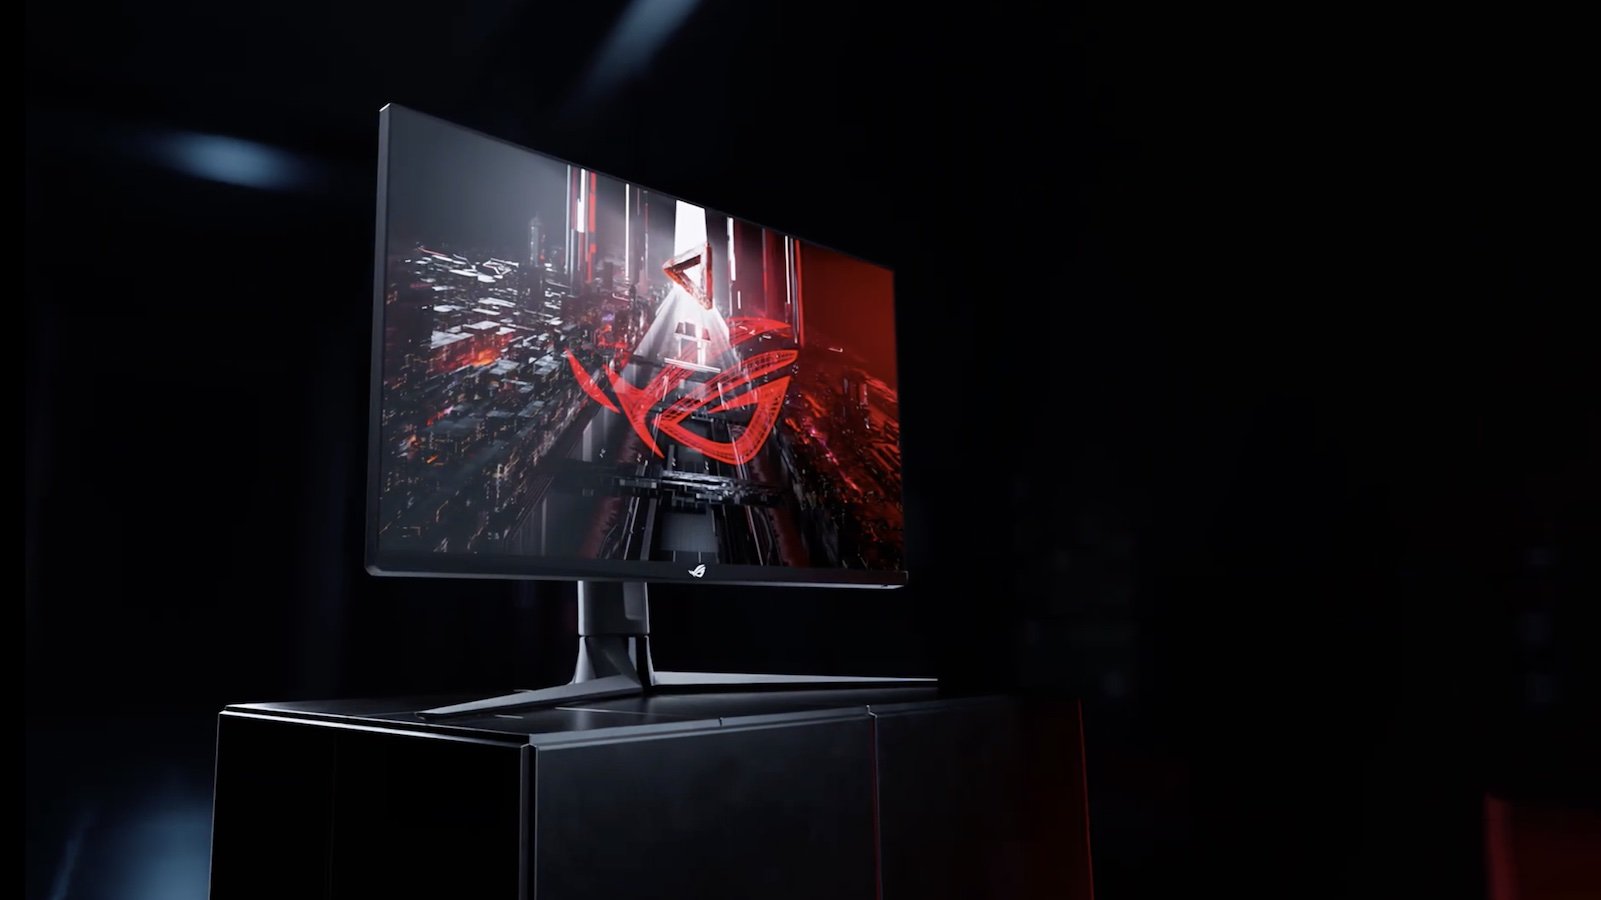 ASUS ROG Swift 32-inch 4K monitor is a gaming powerhouse with two HDMI 2.0 ports